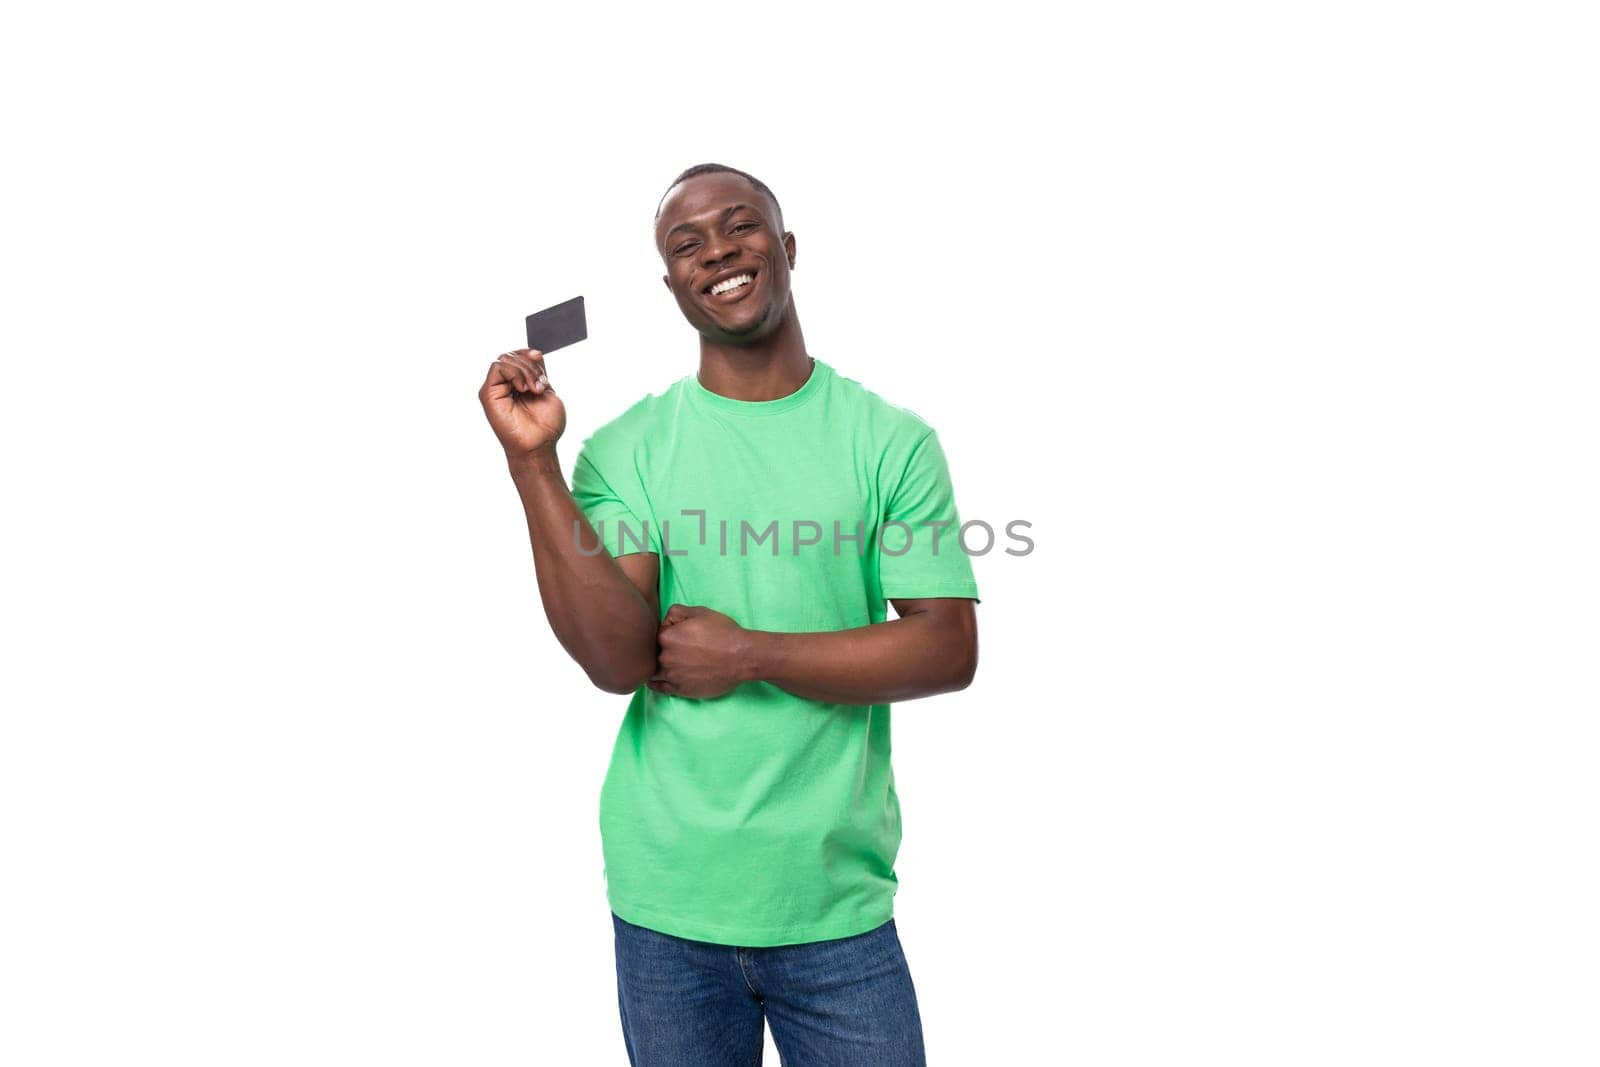 A 30-year-old American man dressed in a light green basic T-shirt holds a plastic credit card by TRMK